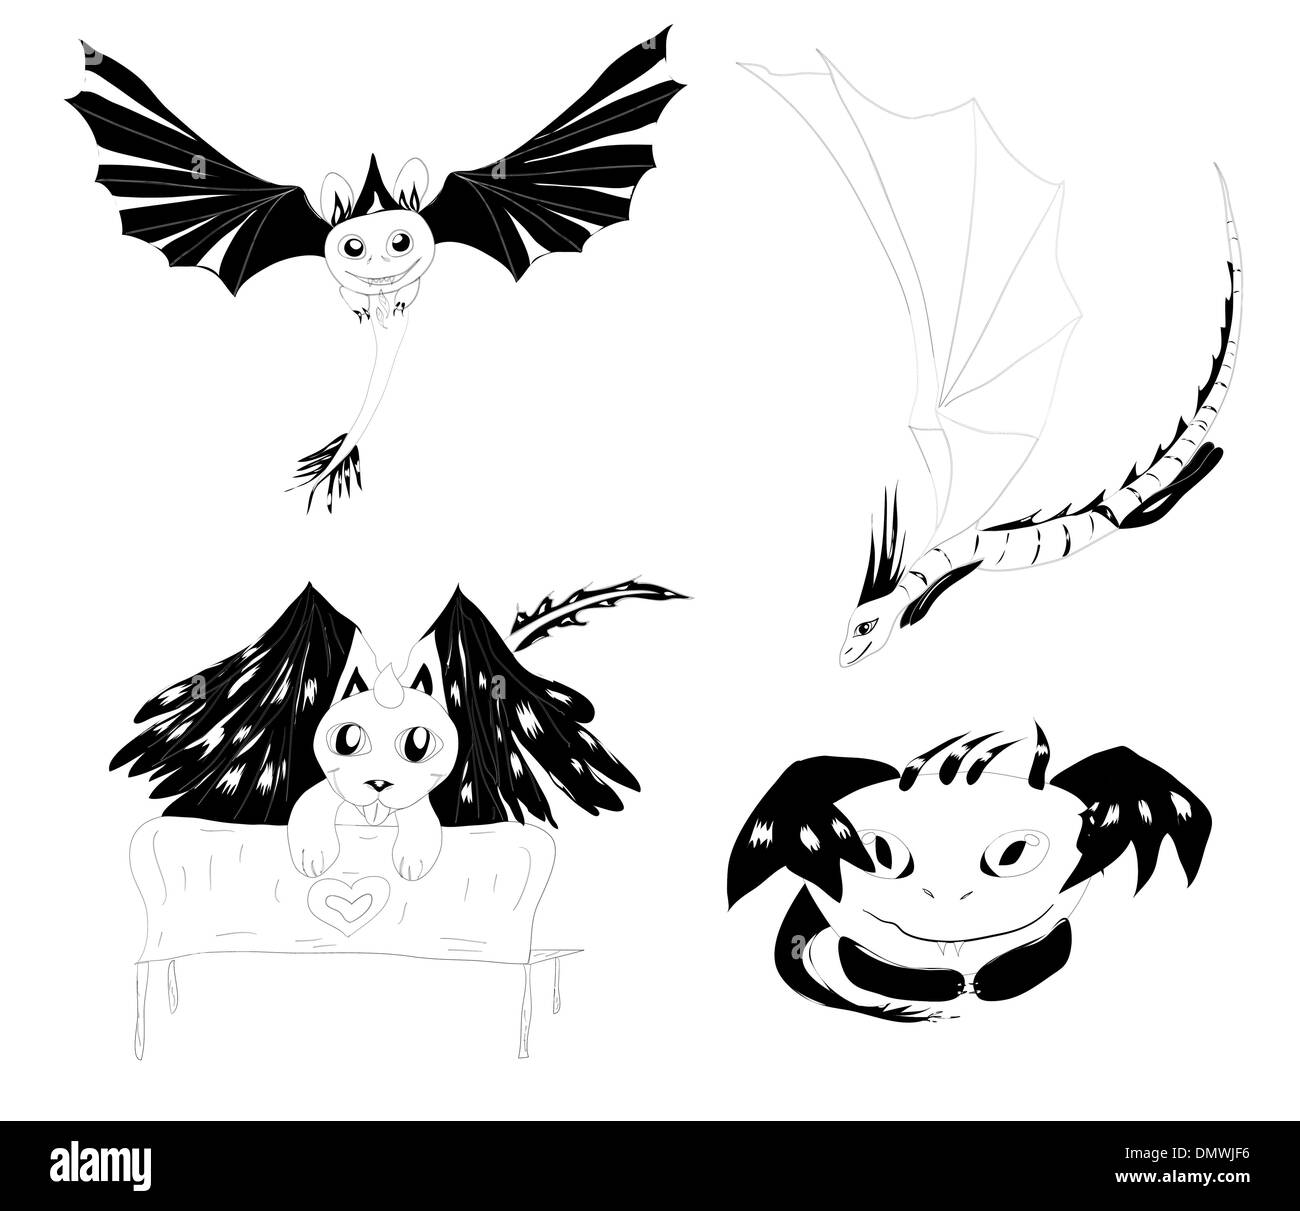 vector set of 4 monsters silhouettes Stock Vector